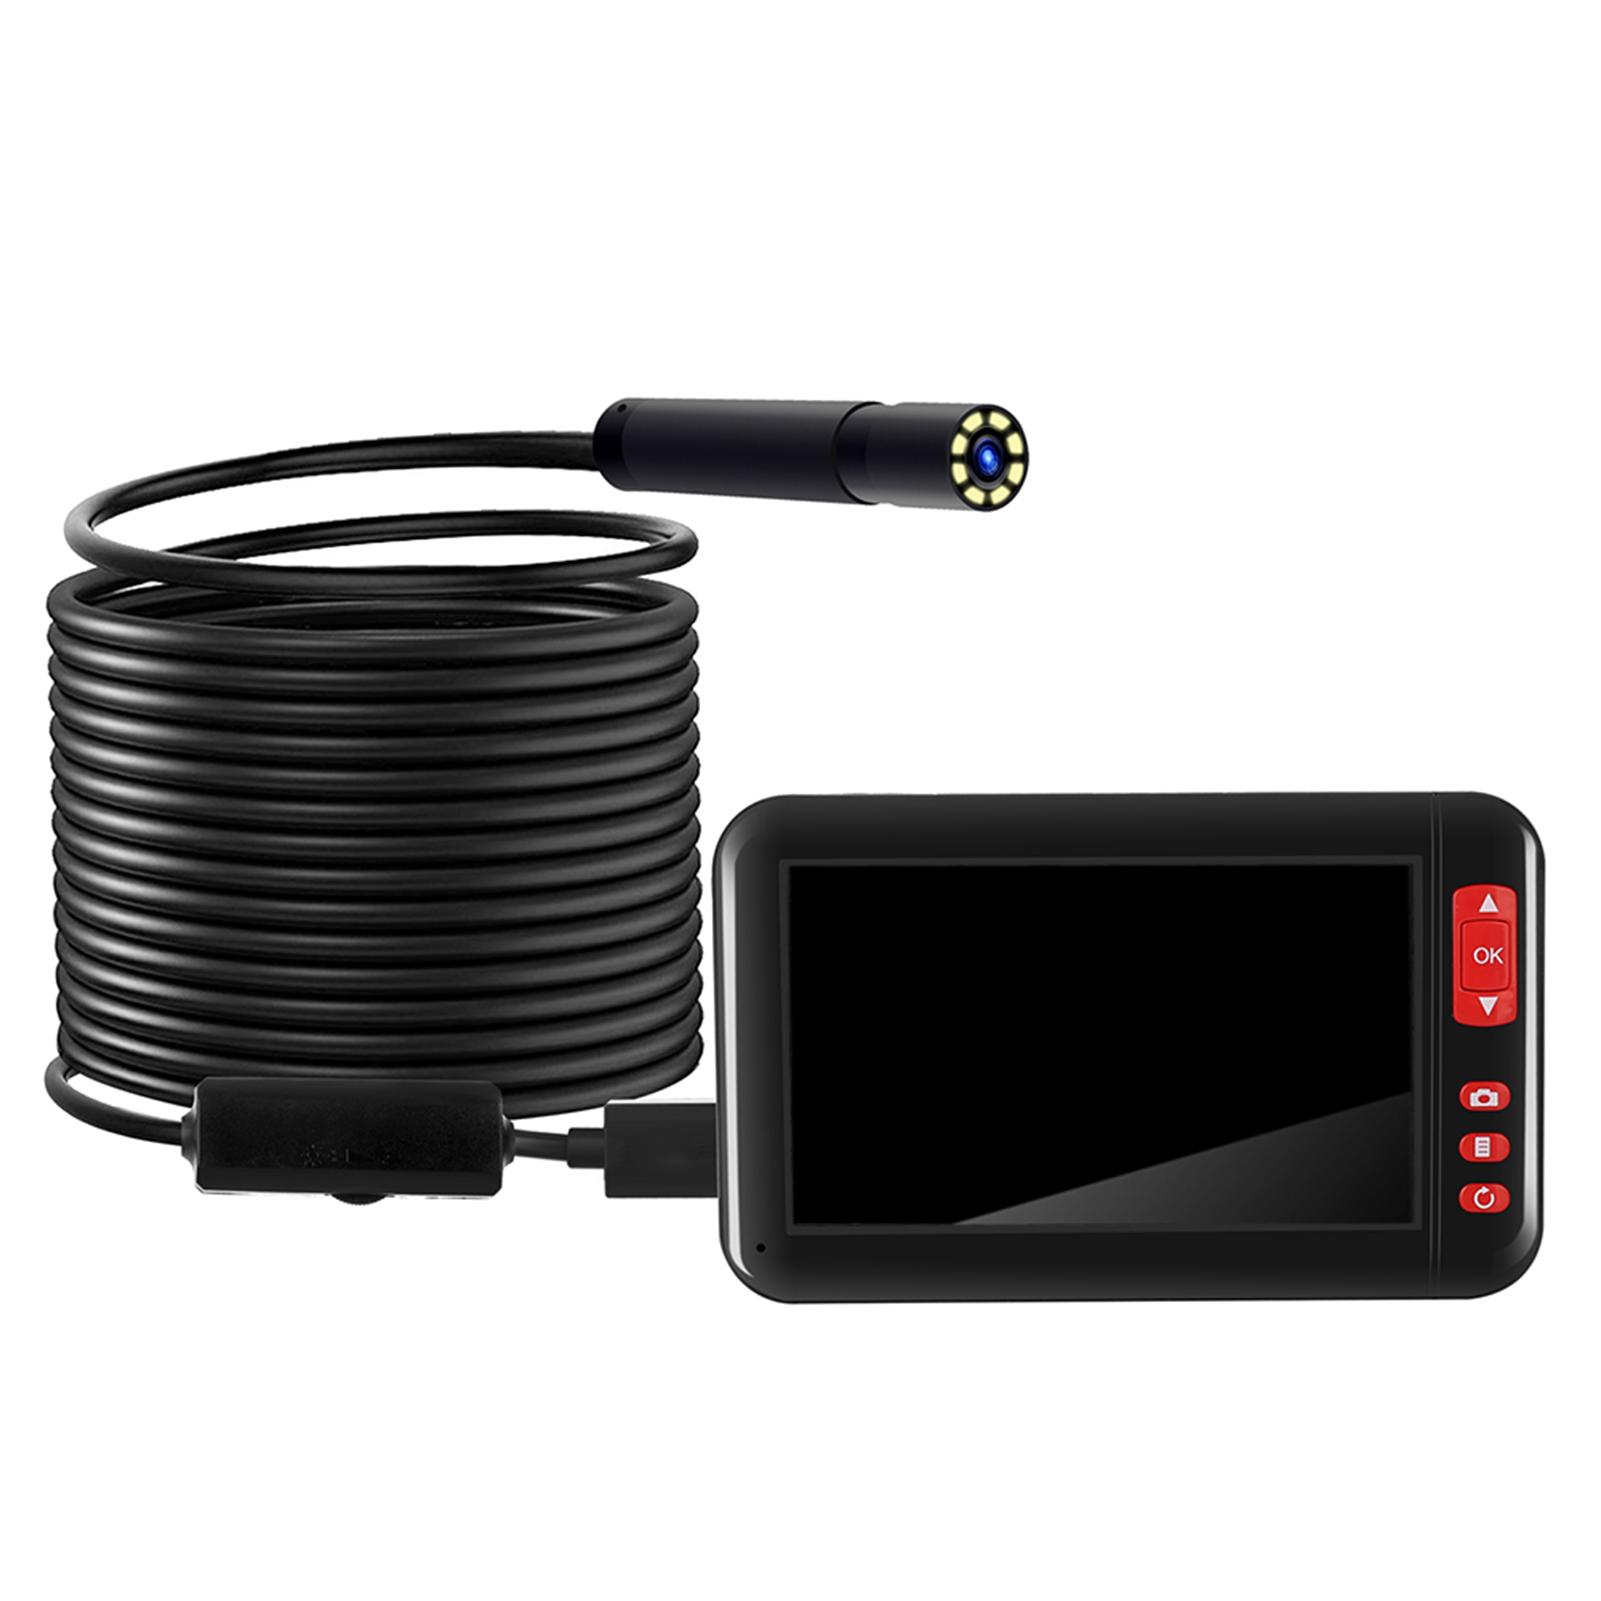 TOMTOP JMS Industrial Endoscope Borescope Inspection Camera Built-in 8pcs LEDs 8mm Lens with 4.3 Inch